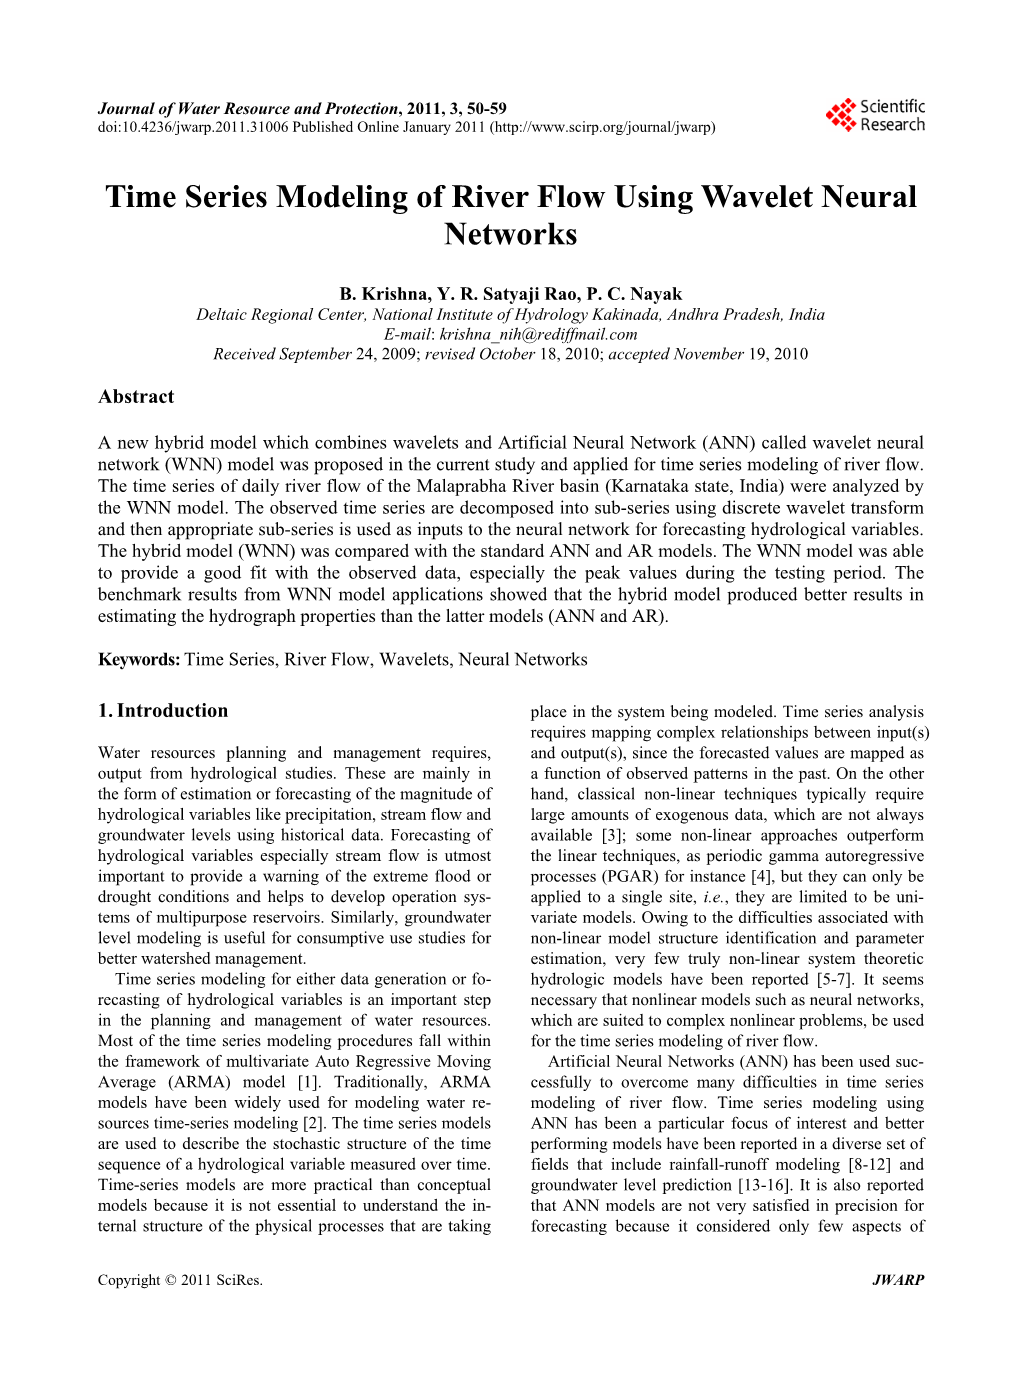 Time Series Modeling of River Flow Using Wavelet Neural Networks